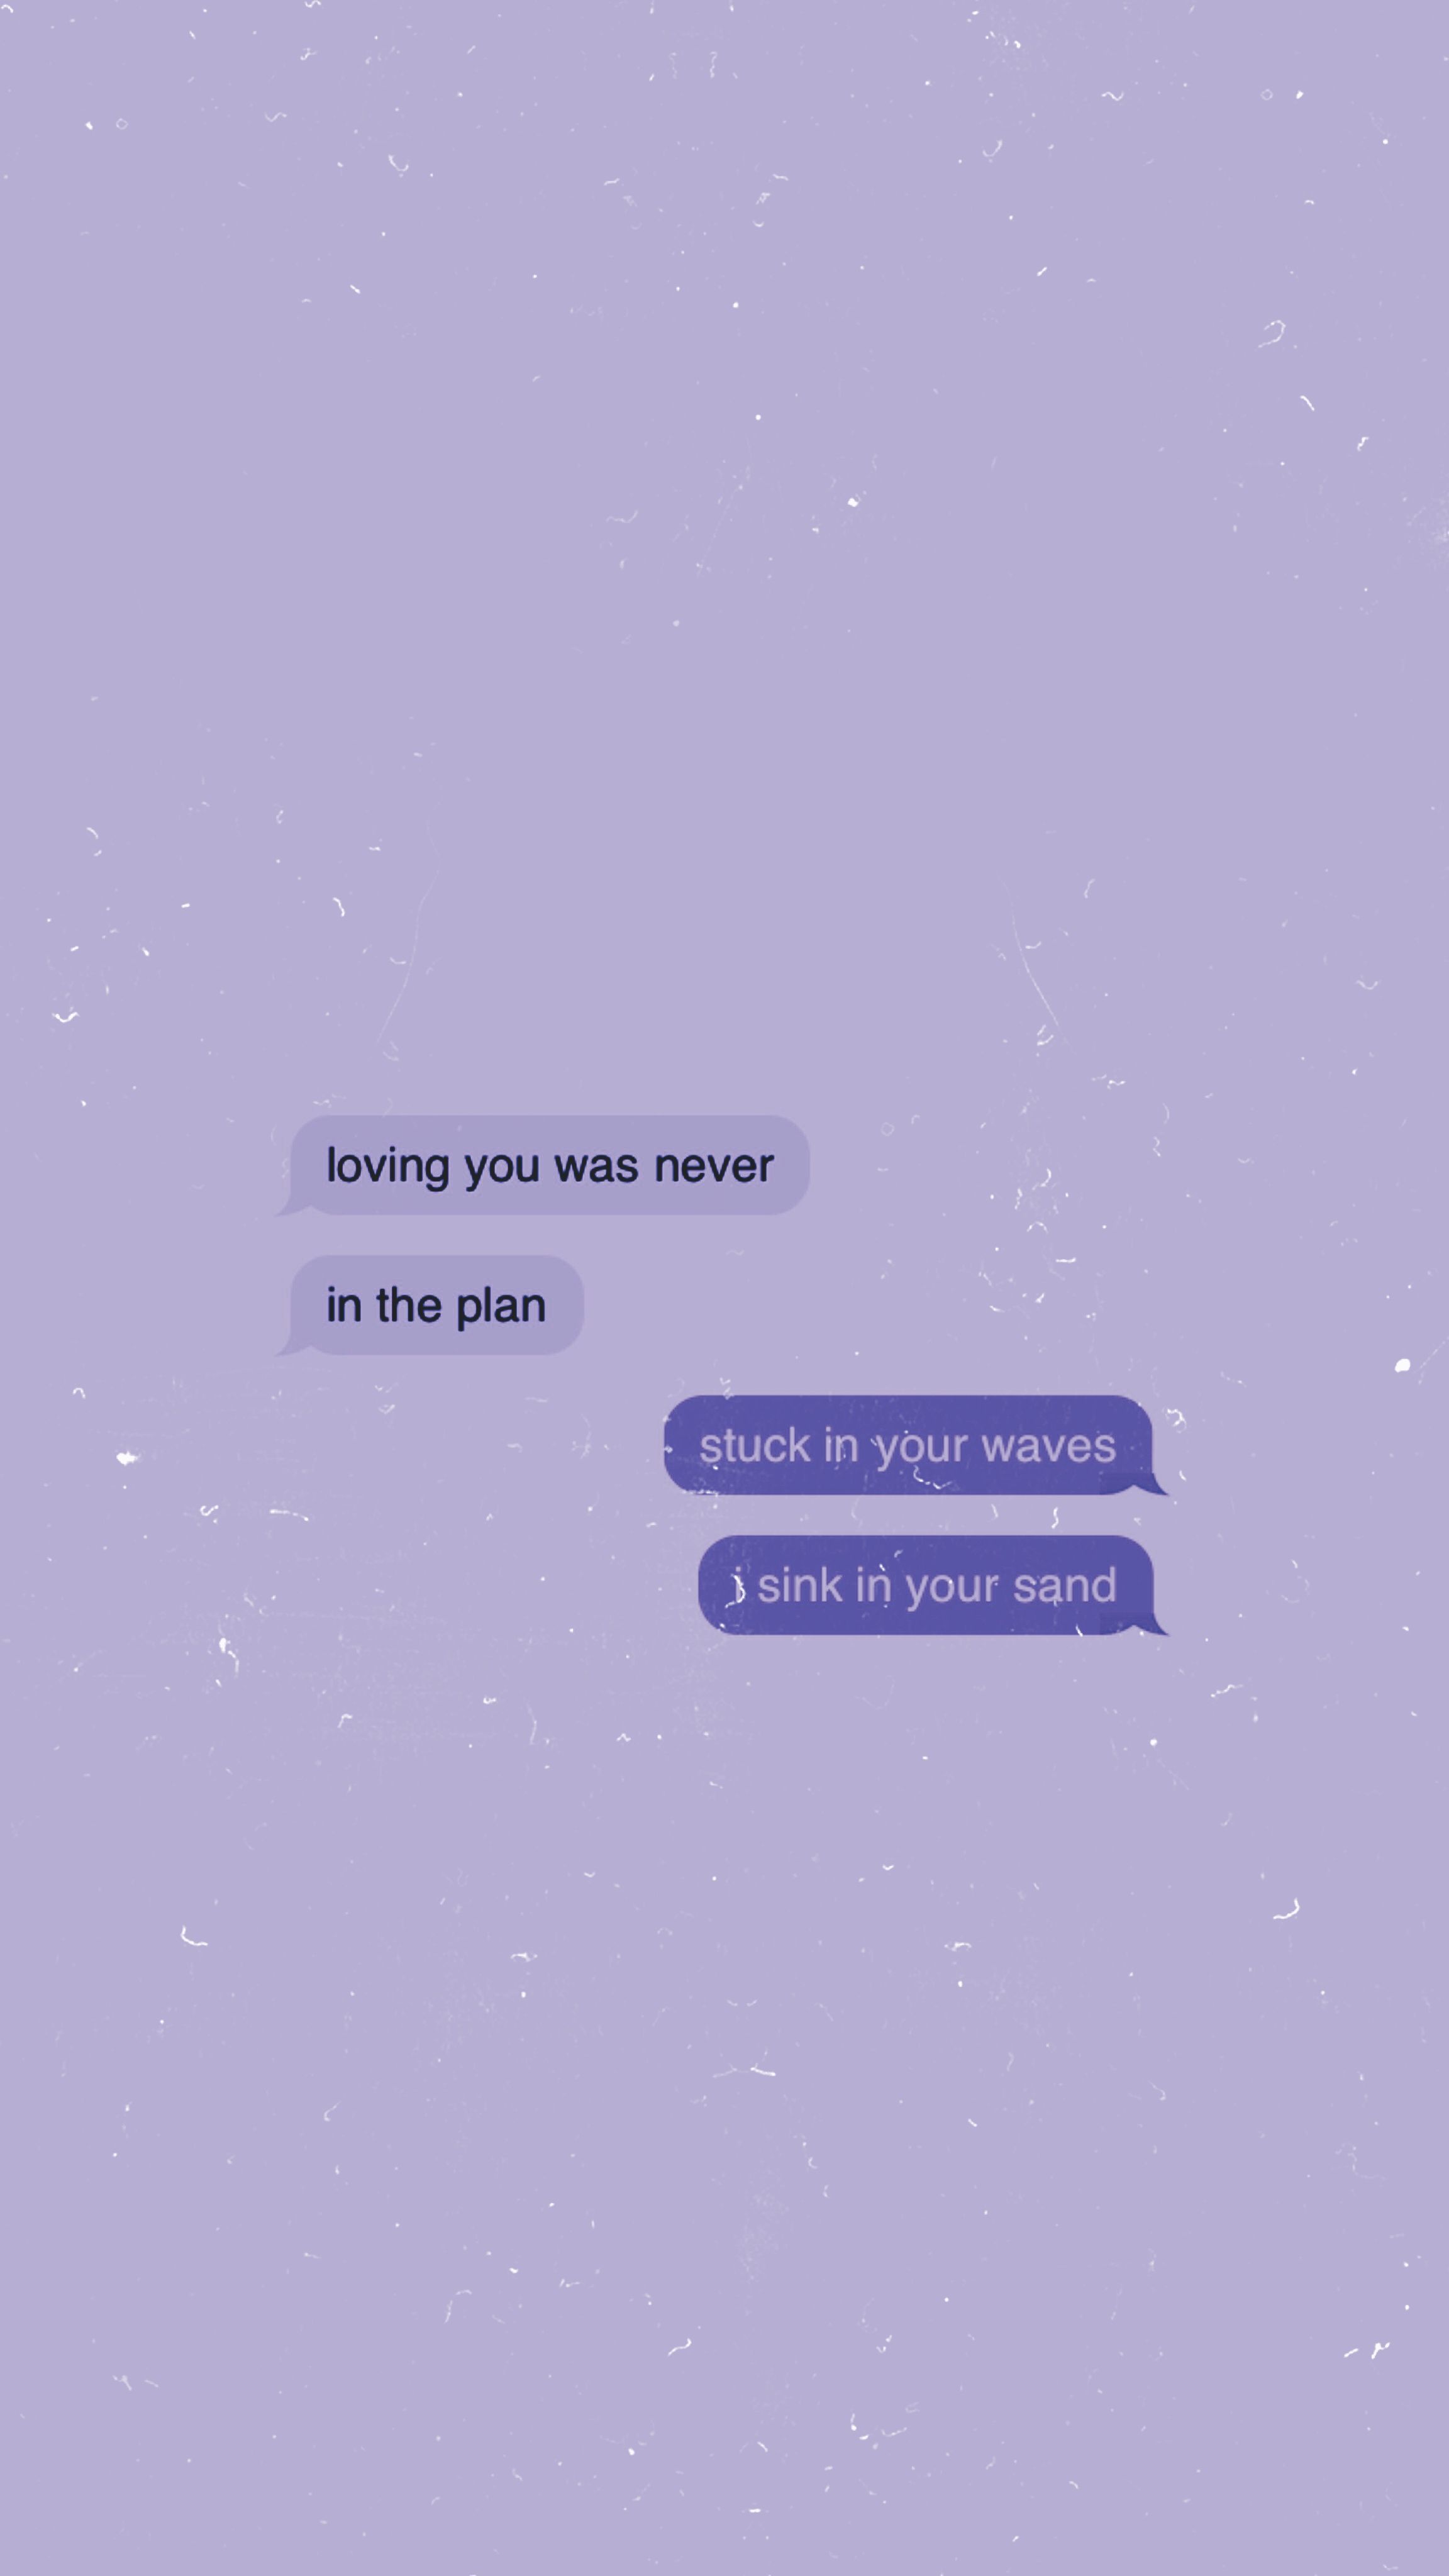 why don't plan X falling lyrics. Cute text messages, Message wallpaper, Cute texts